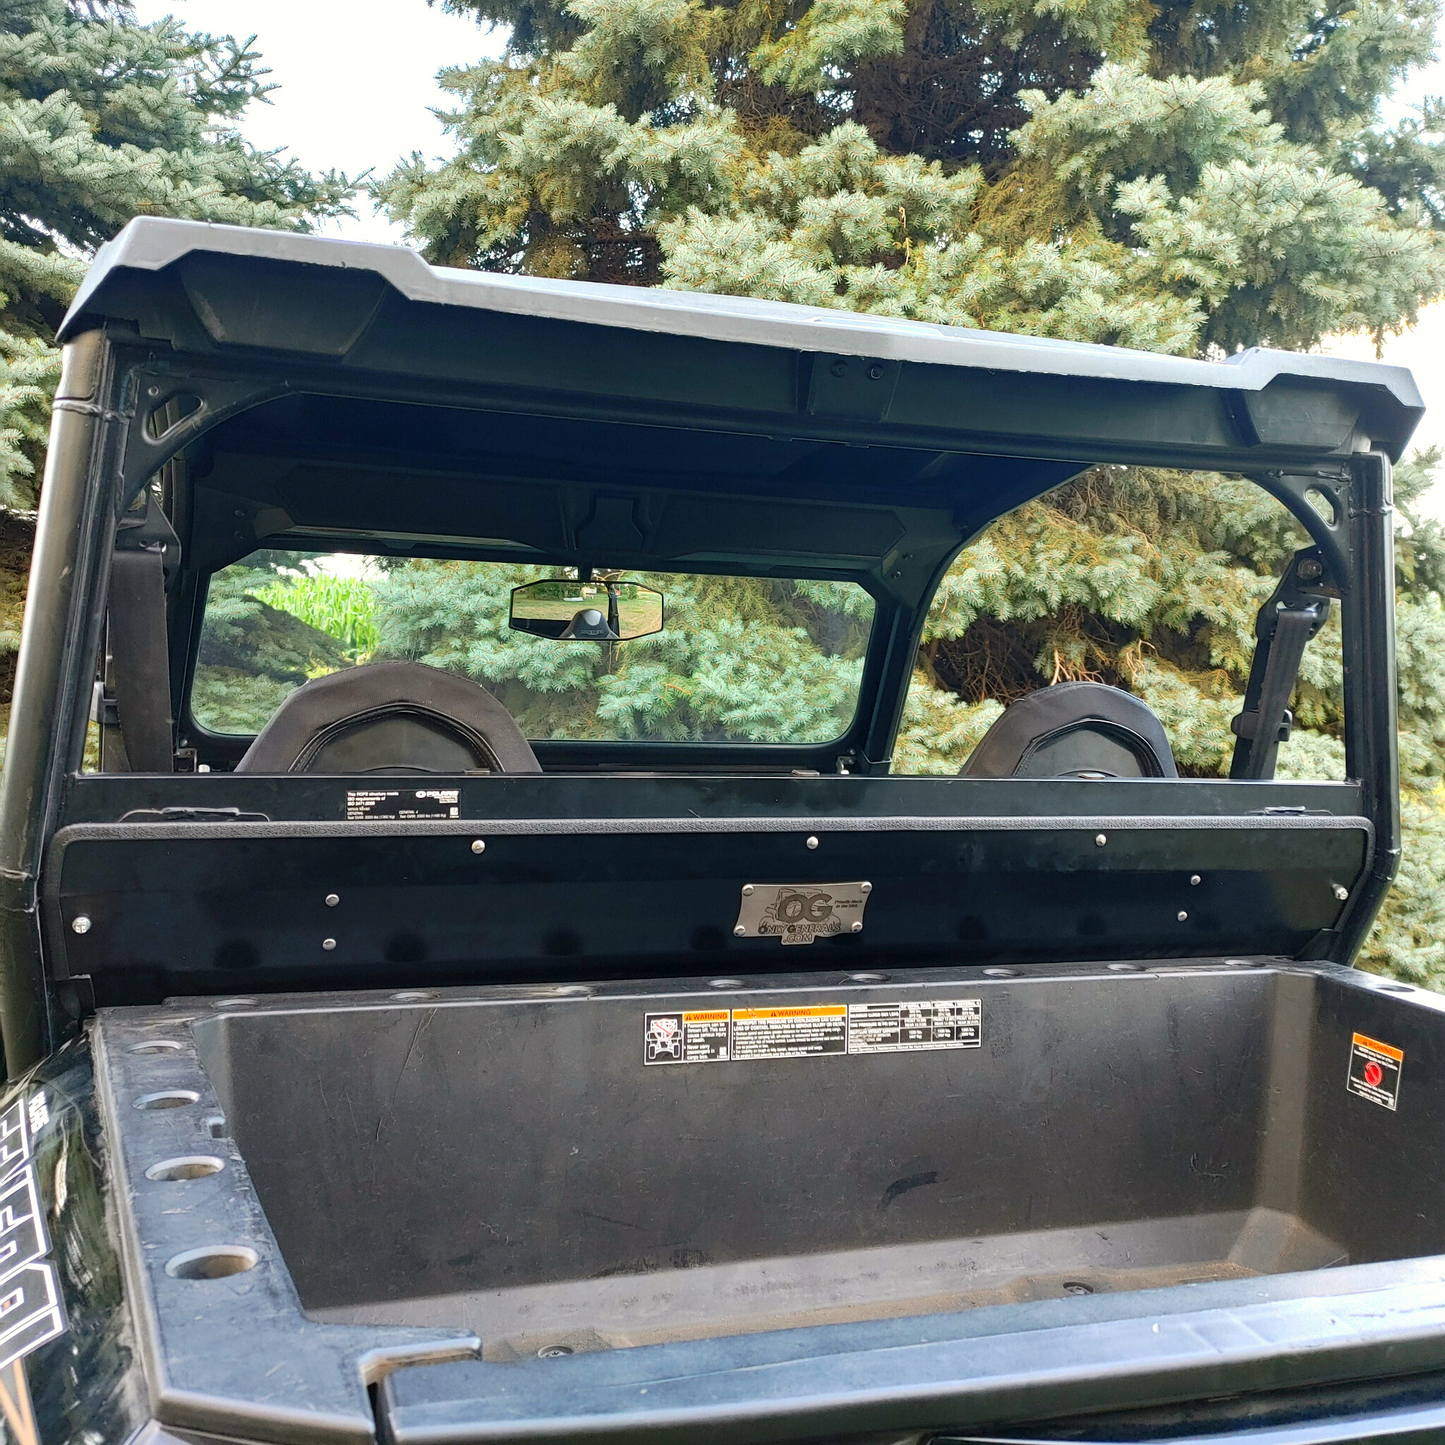 Rear view of OnlyGenerals rear lower filler panel kit intalled on a Polaris General